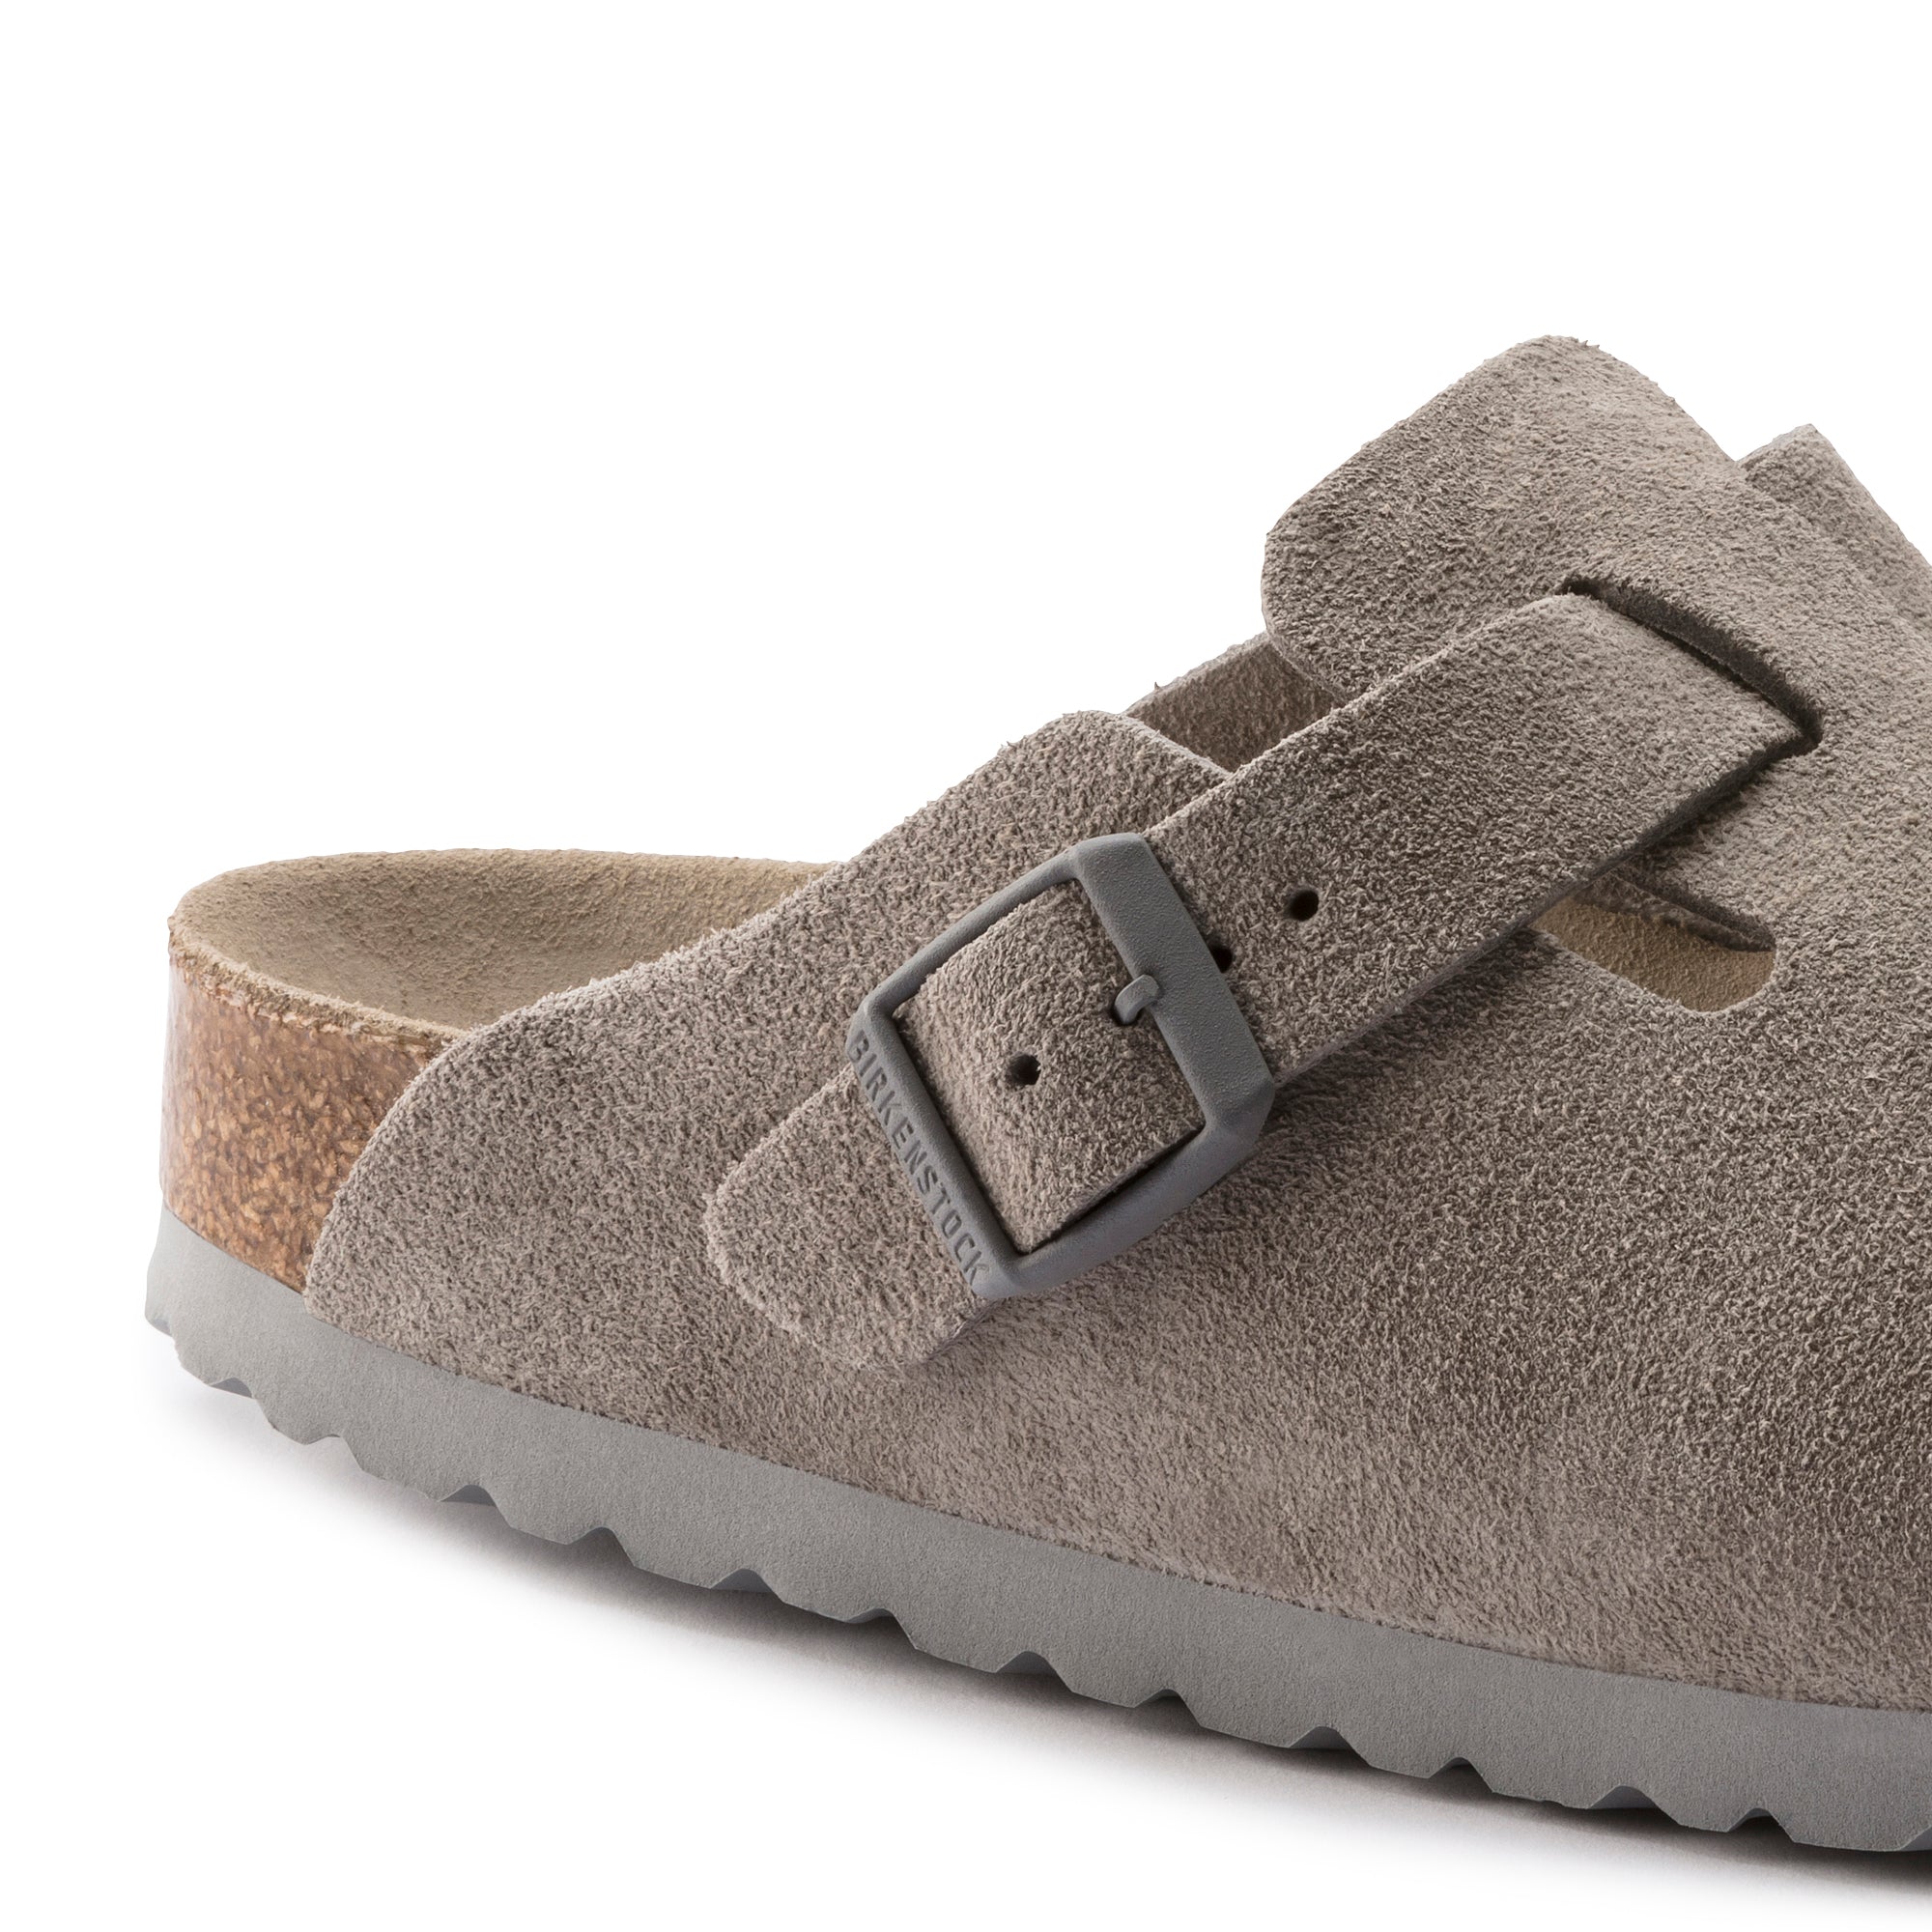 Boston Suede Leather in Stone Coin (Soft Footbed)